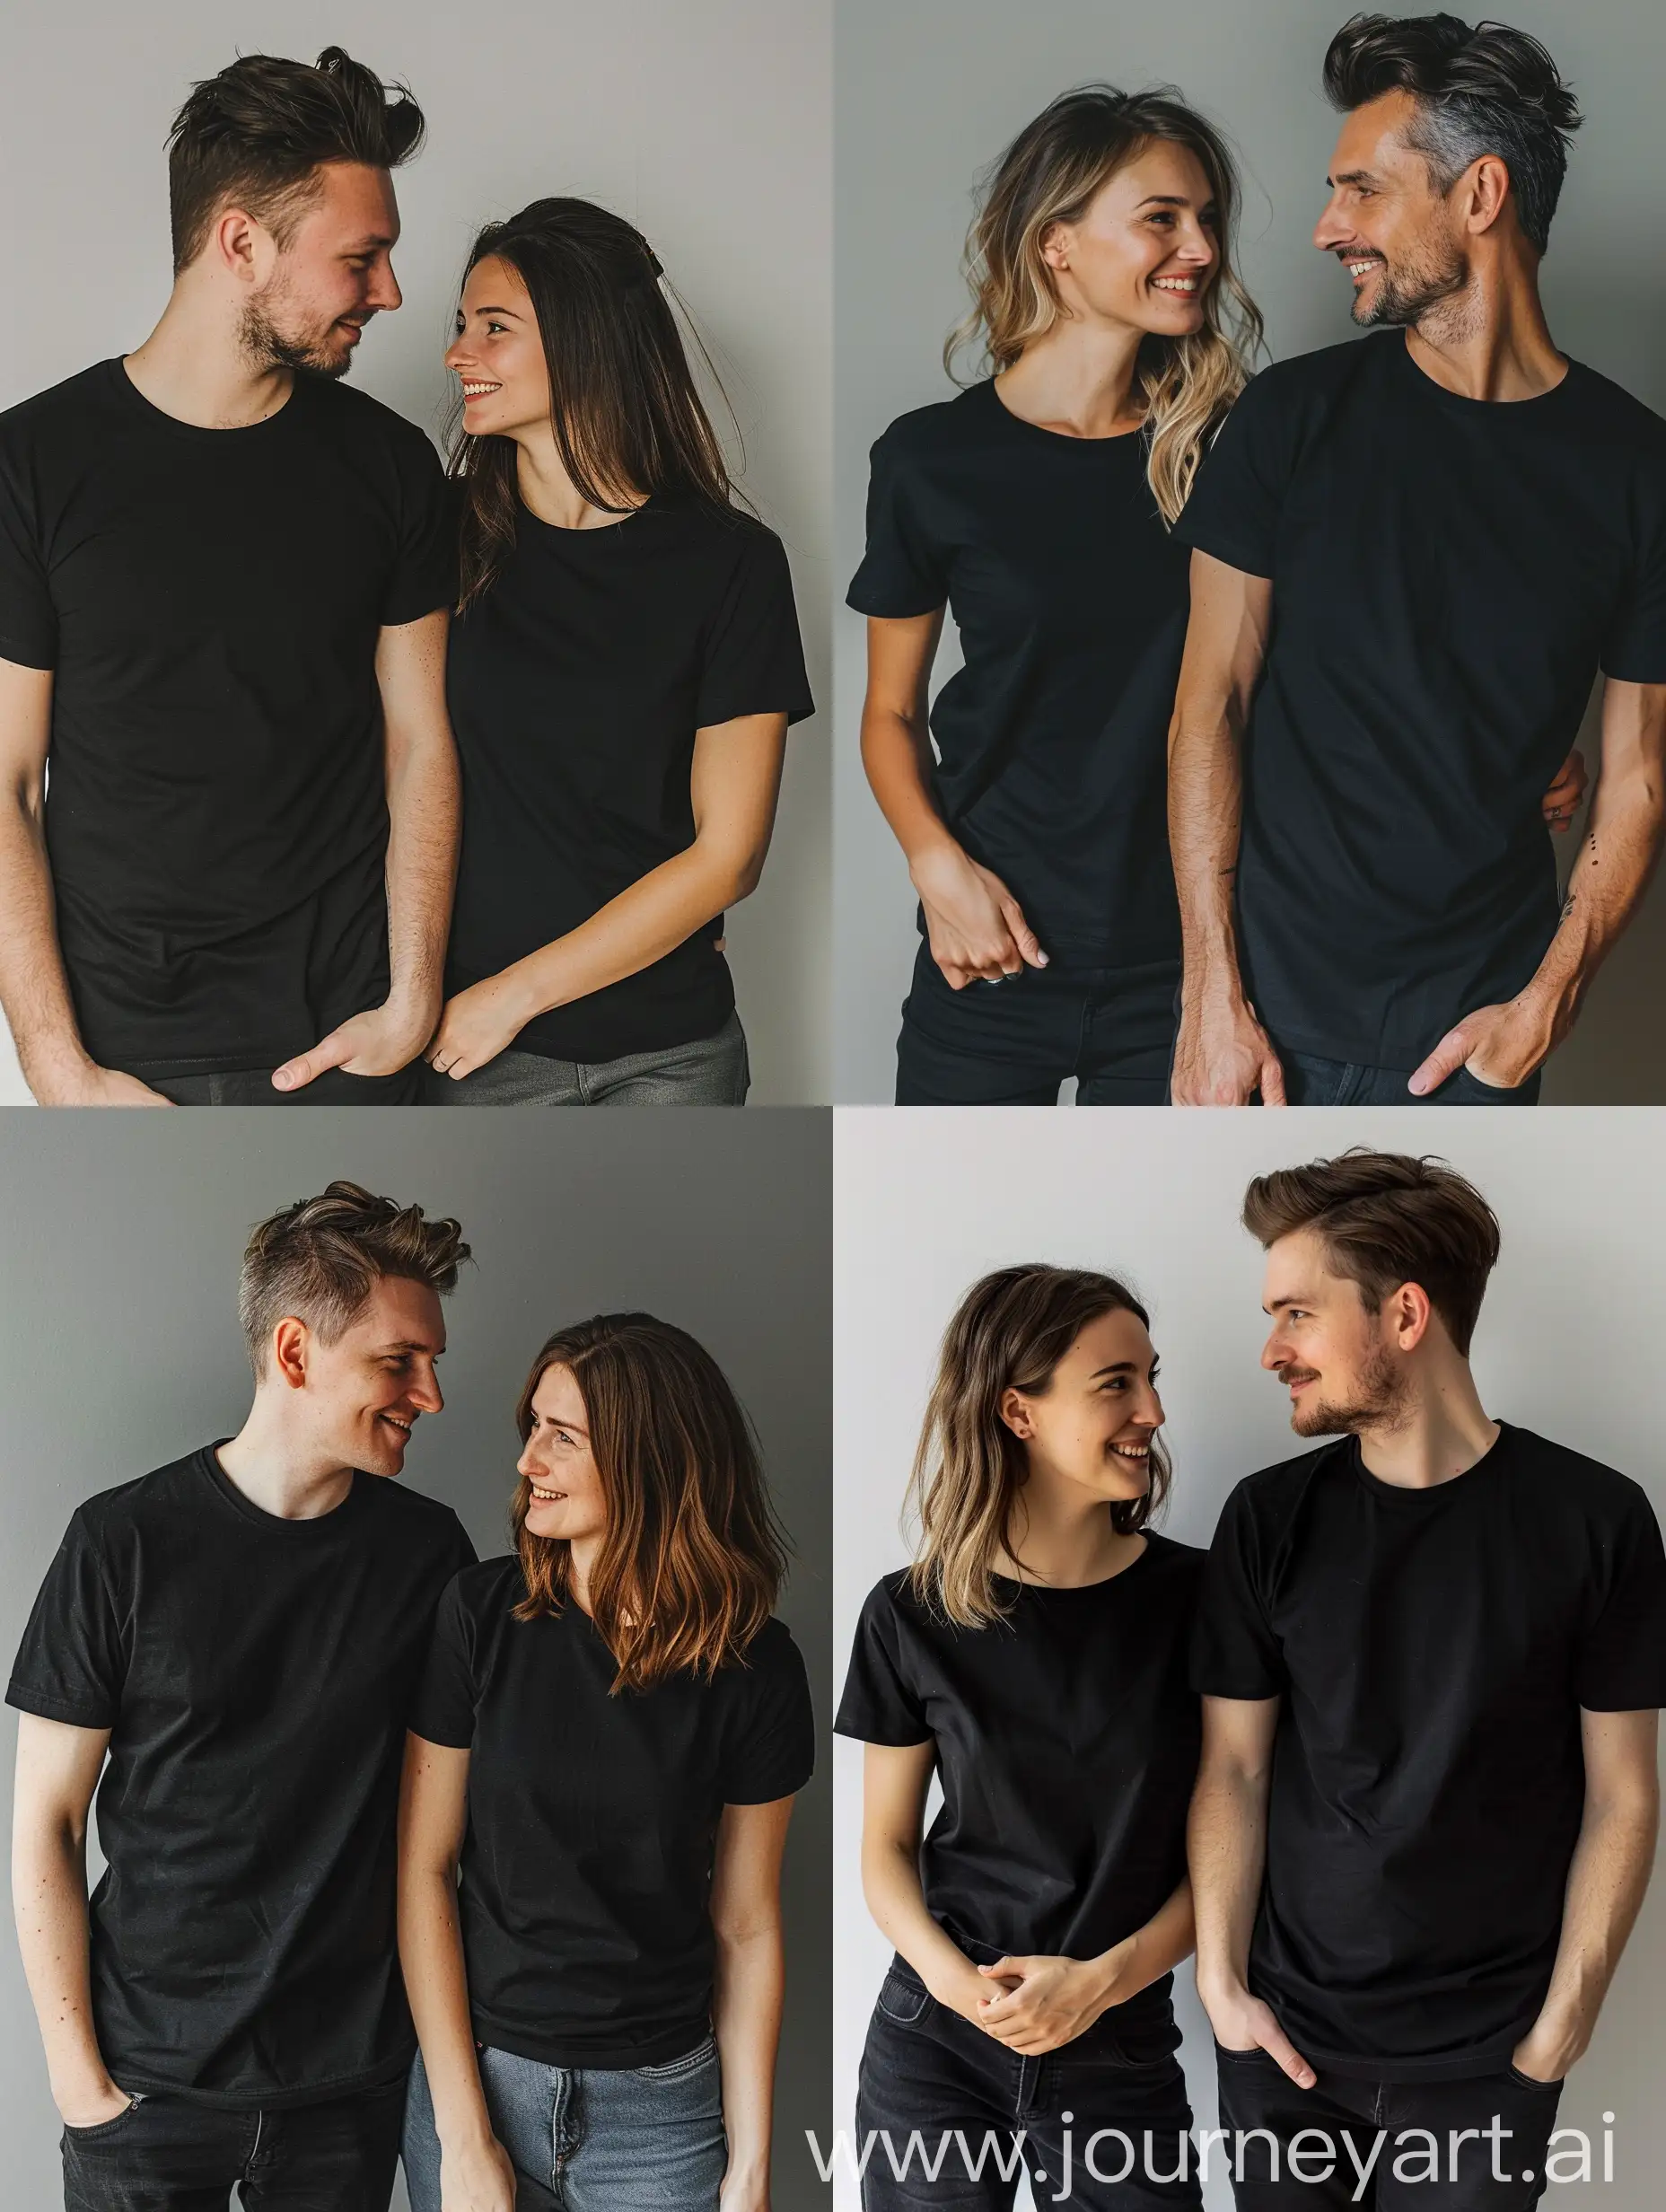 Affectionate-Couple-in-Black-TShirts-Sharing-a-Tender-Moment